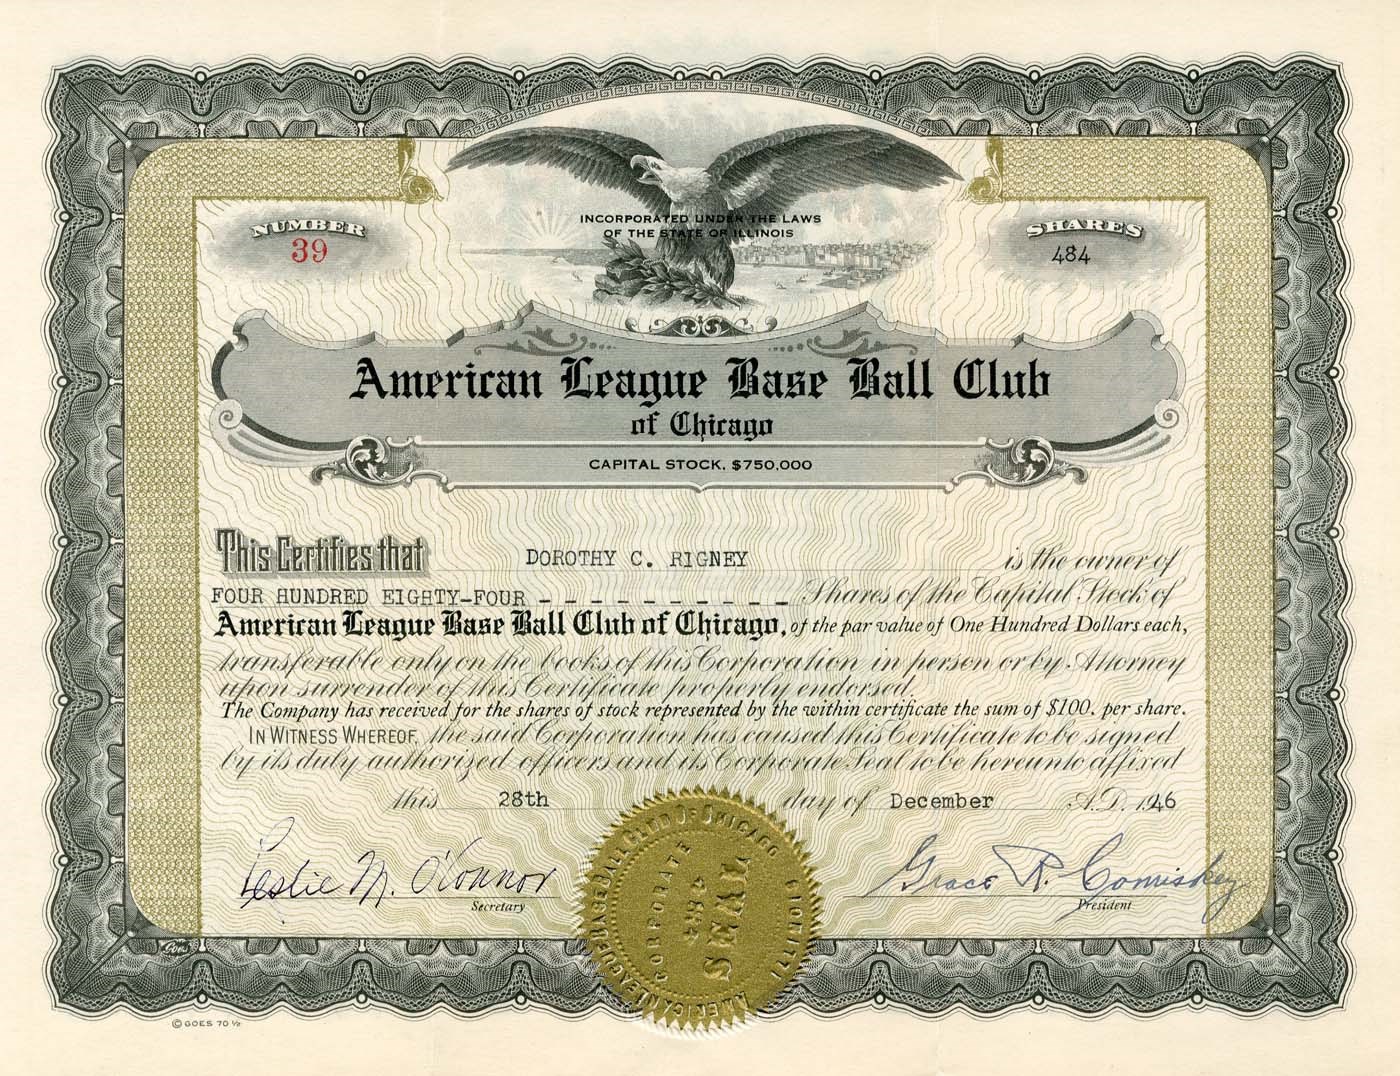 Baseball Memorabilia - 1946 Chicago White Sox Stock Certificates Owned by Comiskey Family (3)